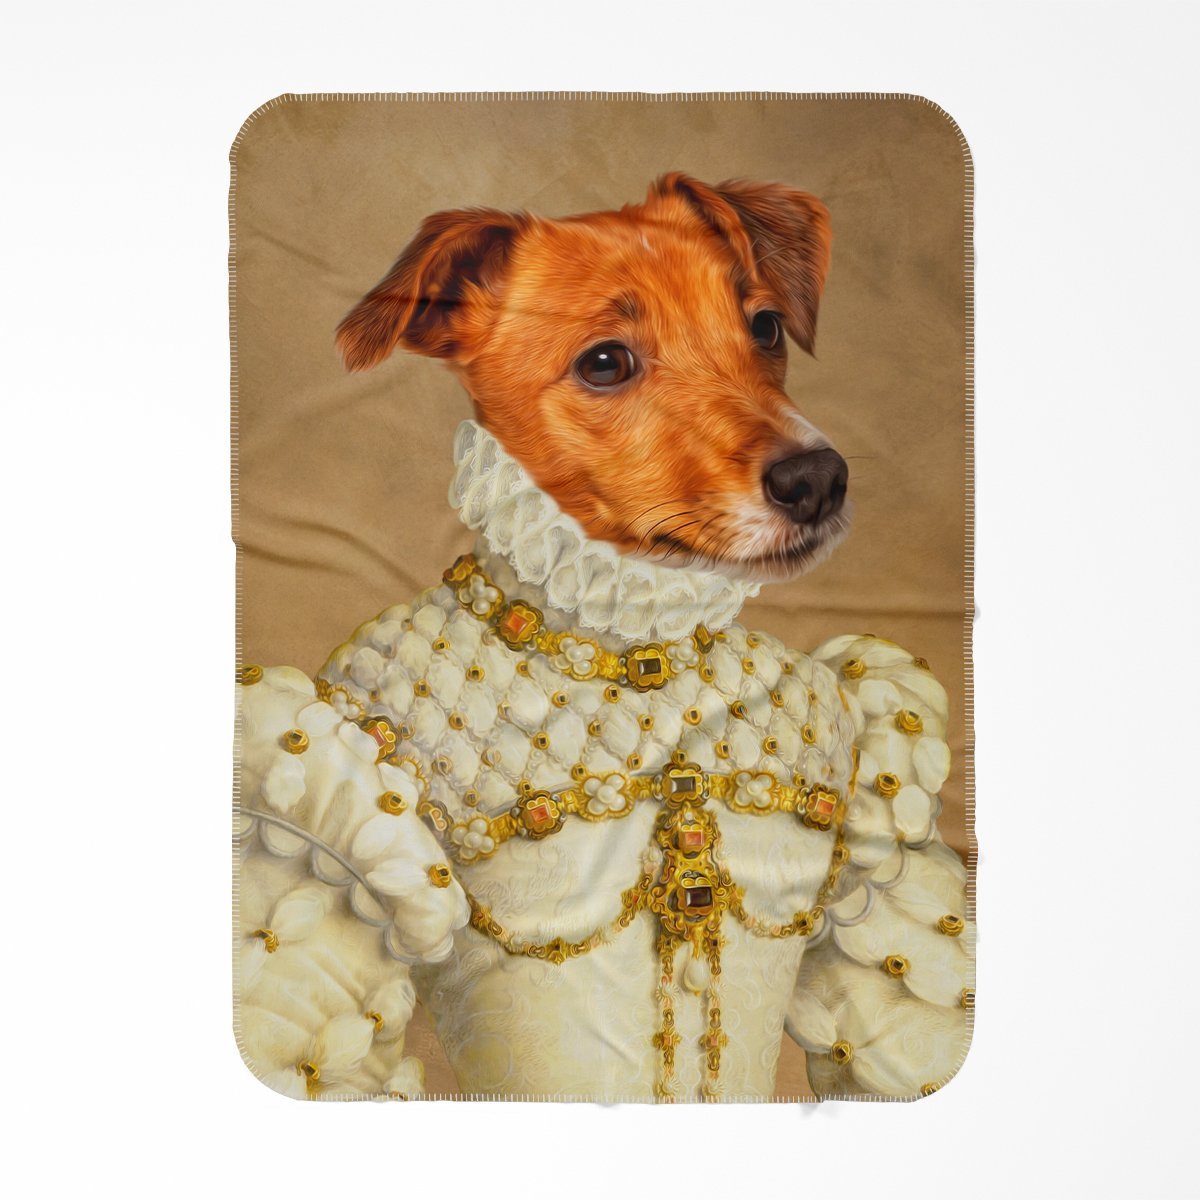 The Princess: Custom Pet Blanket - Paw & Glory - #pet portraits# - #dog portraits# - #pet portraits uk#Pawandglory, Pet art blanket,red dog blanket, blanket with dogs face, dog picture on blanket, dog photo blanket, blanket with dogs on